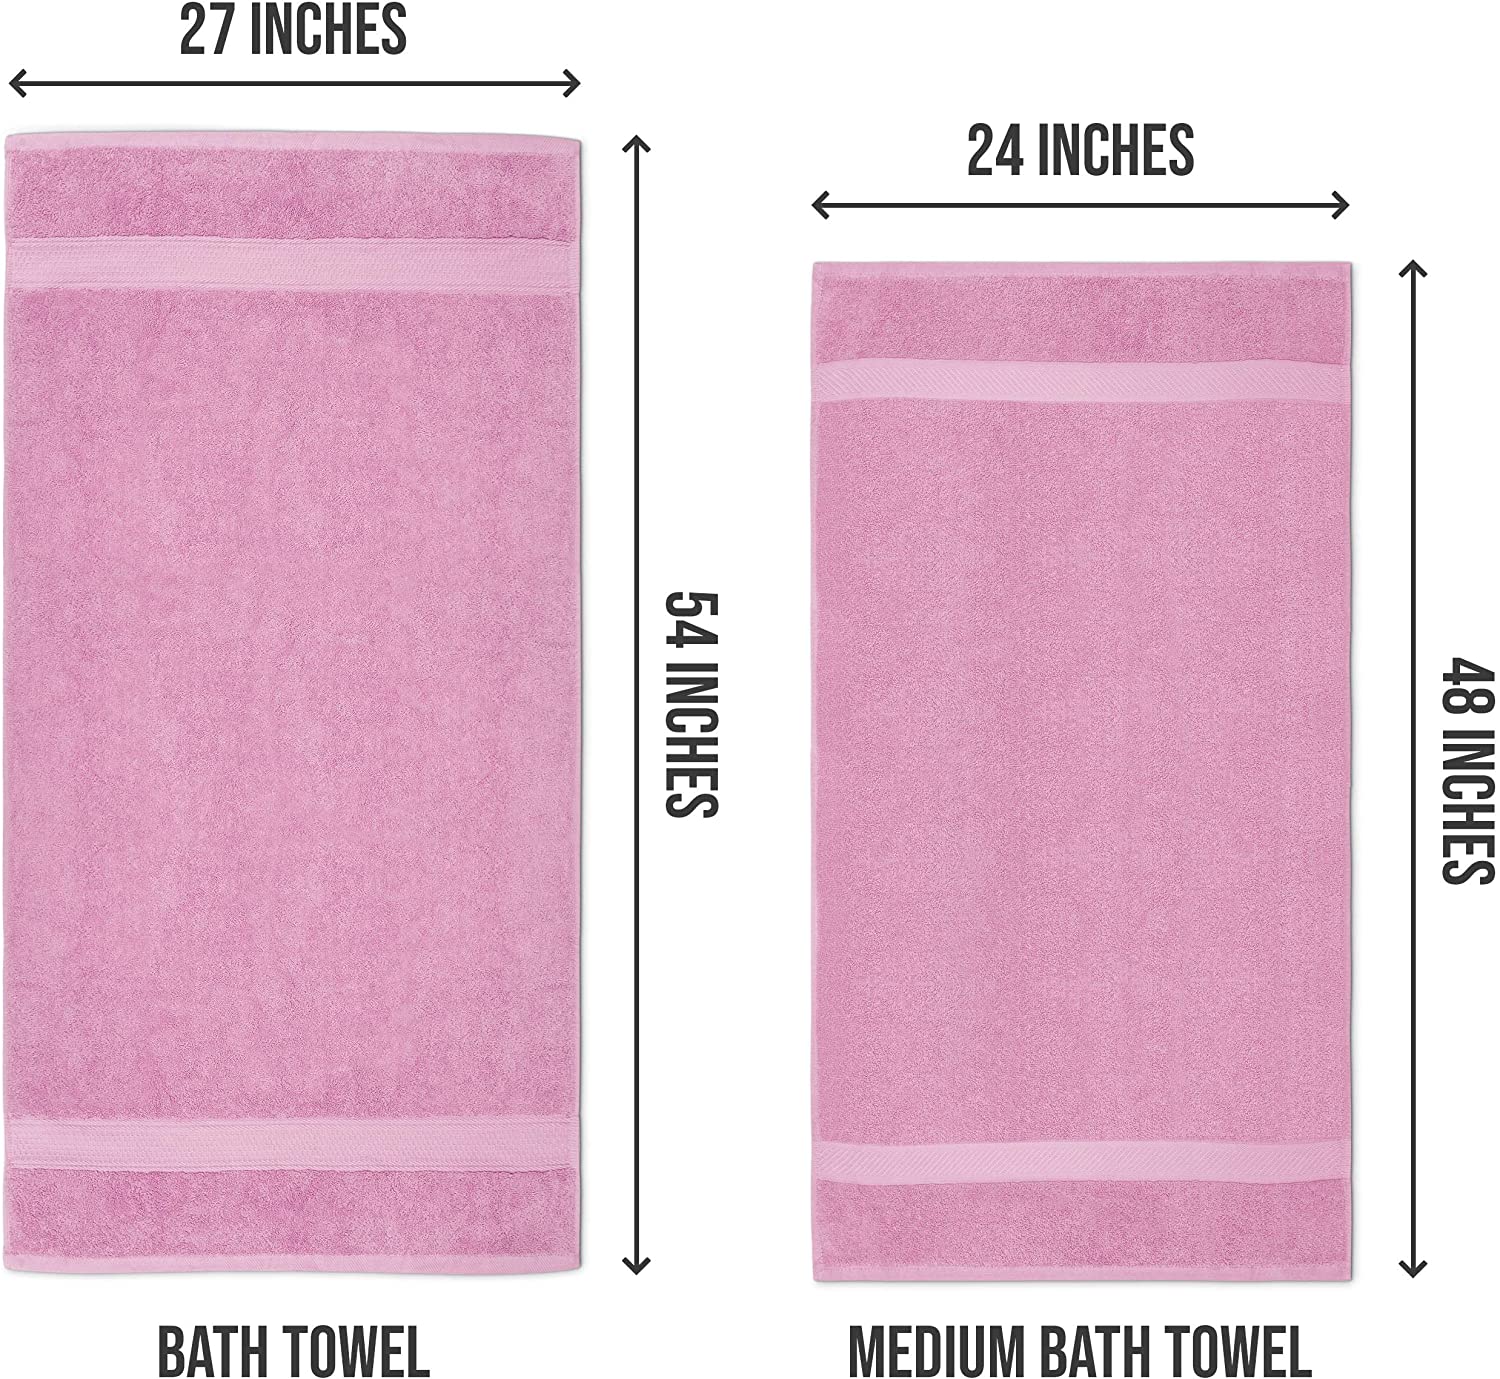 Utopia Towels 4 Pack Premium Viscose Oversized Bath Towels Set, 100% Ring Spun Cotton (27 x 54 inches) Highly Absorbent, Quick Drying Shower Towels